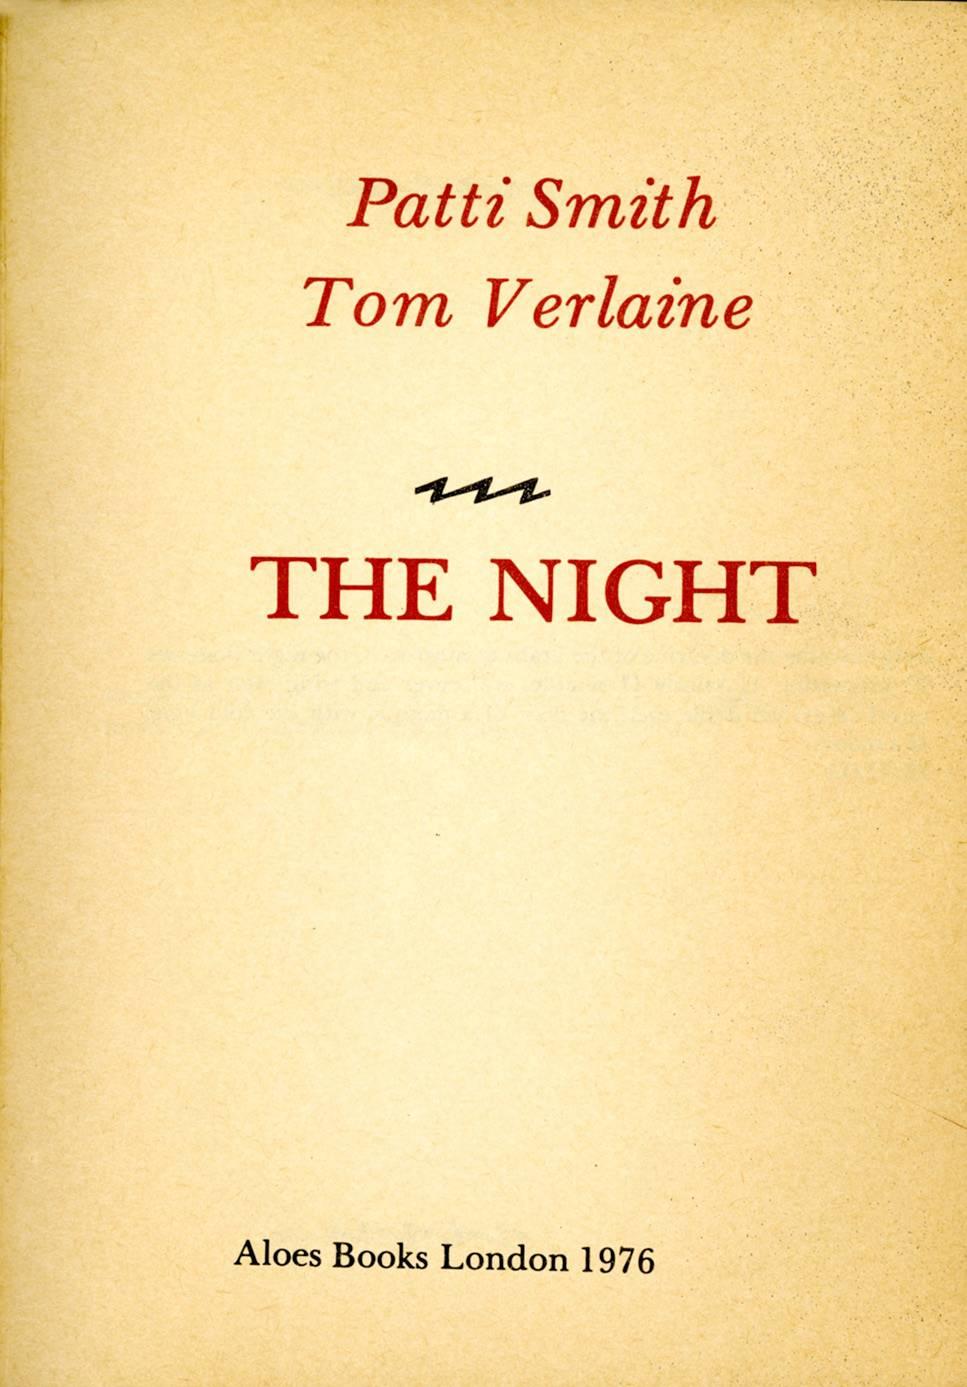 Patti Smith 1970s Poetry
The Night by Patti Smith and Tom Verlaine
A small paperback booklet of alternating poems from the two punk legends. 

London Aloes Books 1976. 16 pages.
Dimensions: 7.75 x 5.5 inches. 
Unnumbered from an edition of